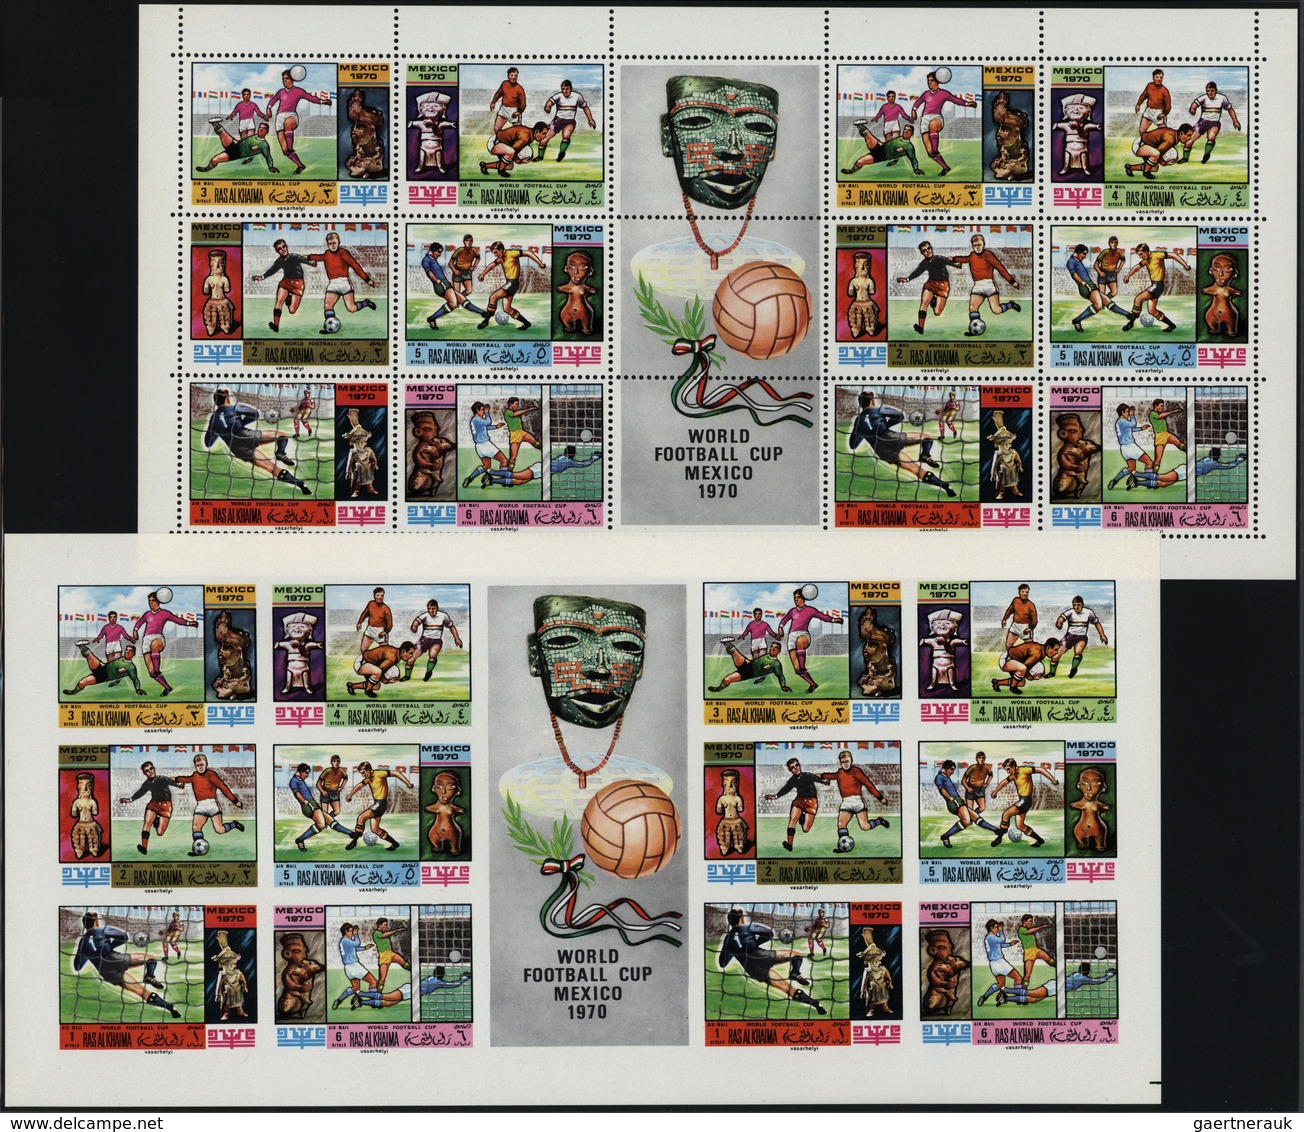 Ras al Khaima: 1968/1972, miscellaneous balance incl. imperf. issues, thematic sets (Sports), proof